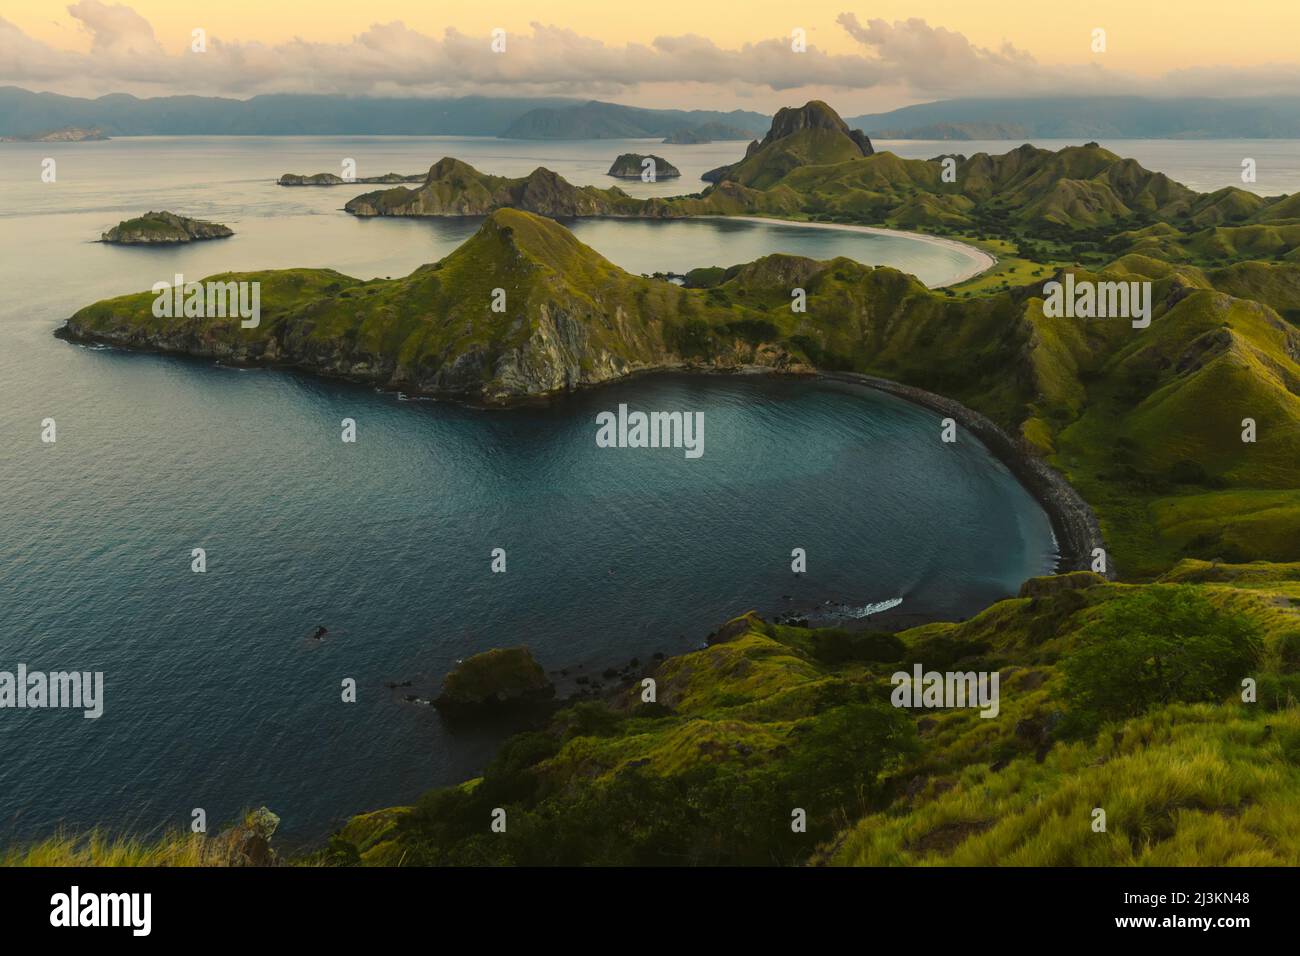 View of the bay with a black sand beach and a white sand beach in the background at Padar Island in Komodo National Park in the Komodo Archipelago ... Stock Photo